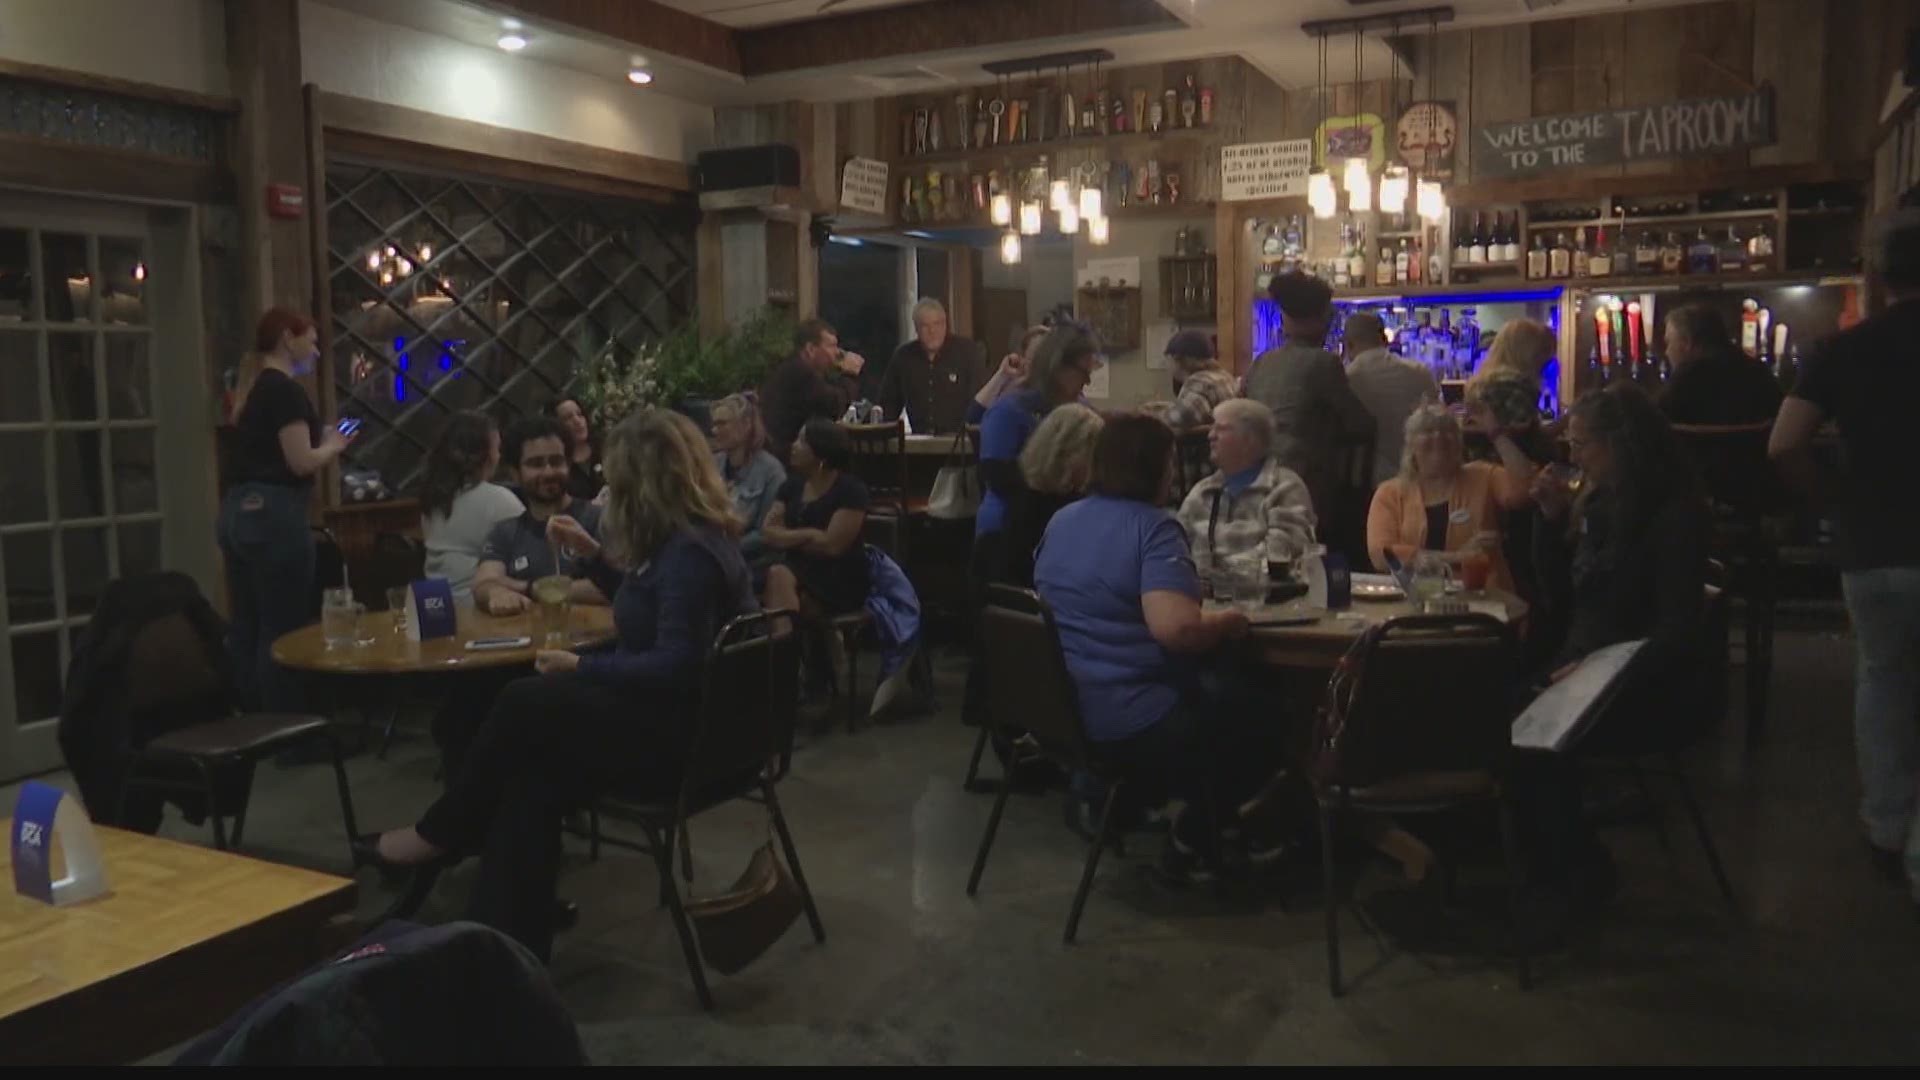 WZDX News was at the democratic watch party on Election Night.